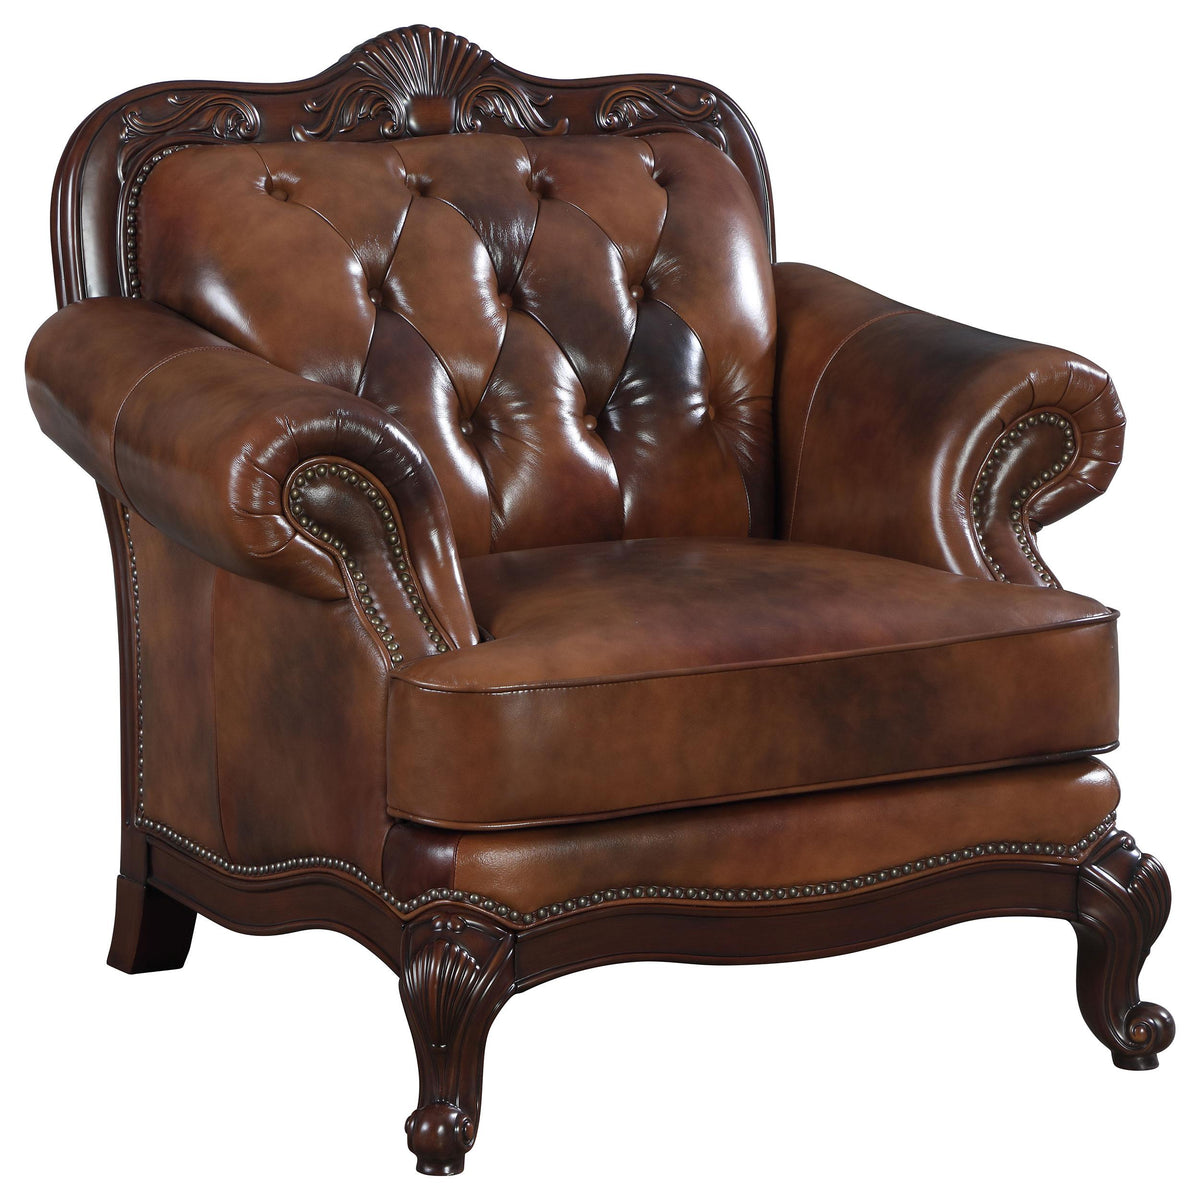 Victoria Rolled Arm Chair Tri-tone and Brown  Half Price Furniture